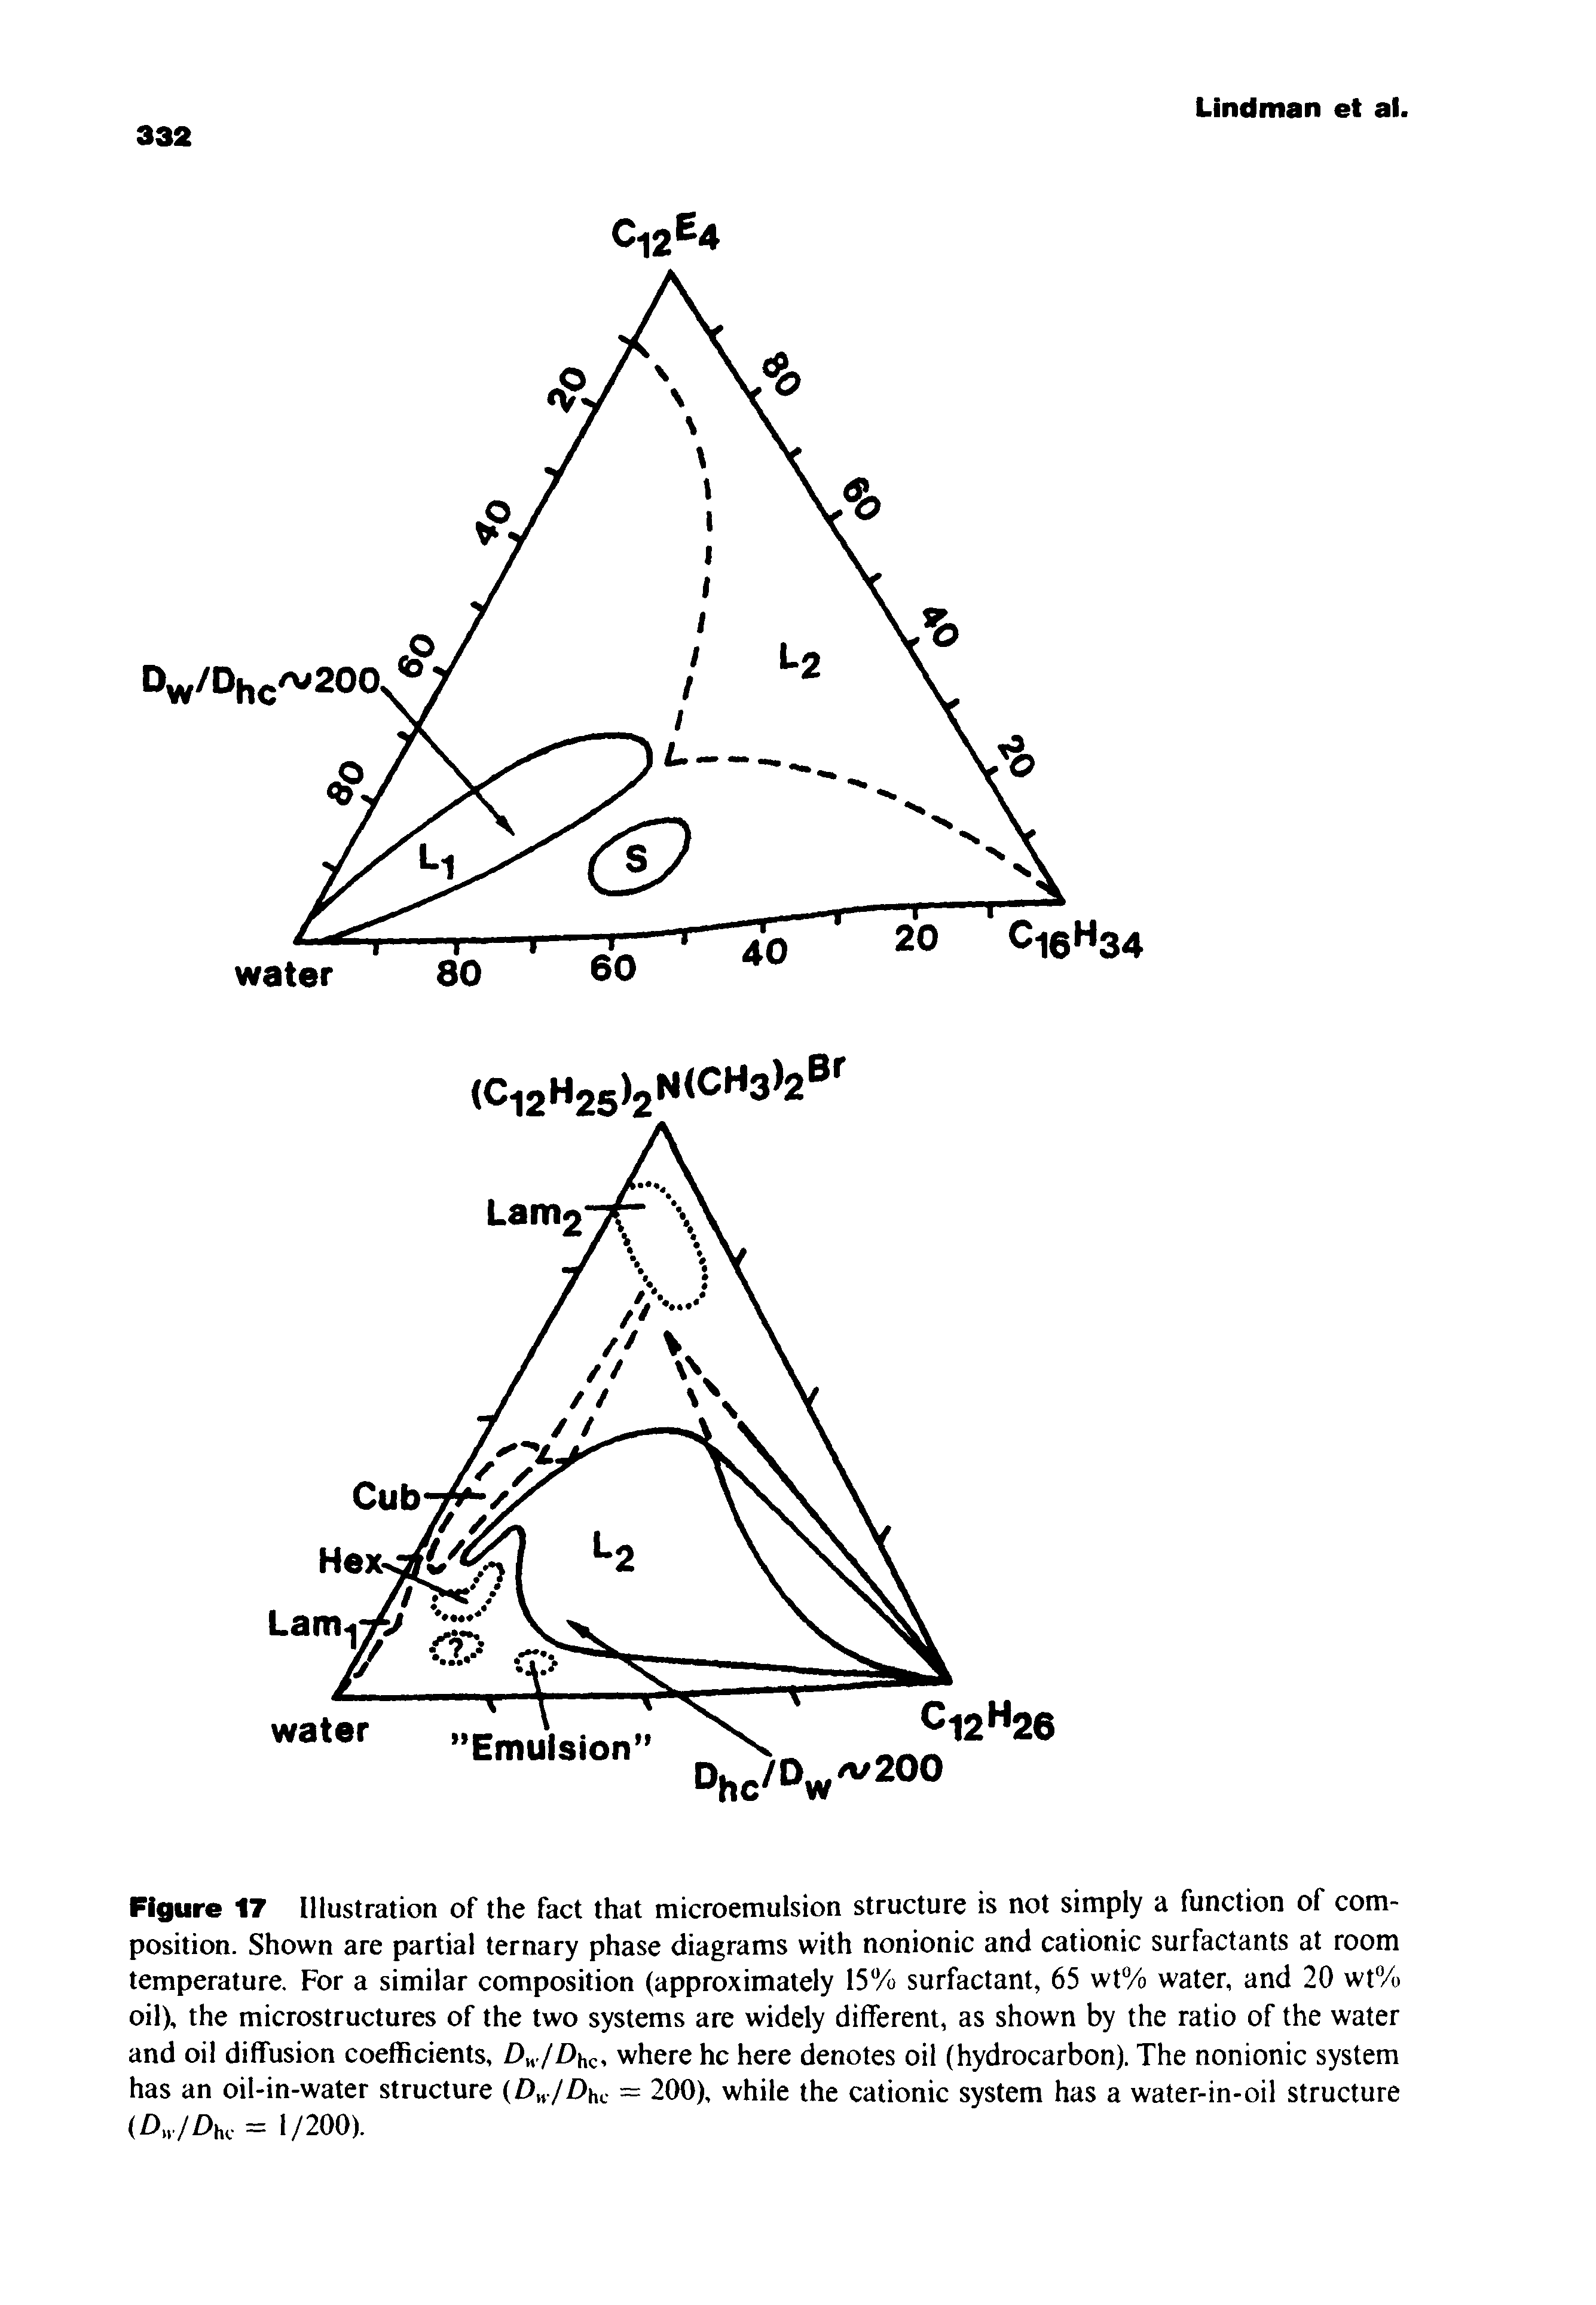 Figure 17 Illustration of the fact that microemulsion structure is not simply a function of composition. Shown are partial ternary phase diagrams with nonionic and cationic surfactants at room temperature. For a similar composition (approximately 15% surfactant, 65 wt% water, and 20 wt% oil), the microstructures of the two systems are widely different, as shown by the ratio of the water and oil diffusion coefficients, Dn /Dhc where he here denotes oil (hydrocarbon). The nonionic system has an oil-in-water structure (D //)hc = 200), while the cationic system has a water-in-oil structure (D,/Z)h. = 1/200).